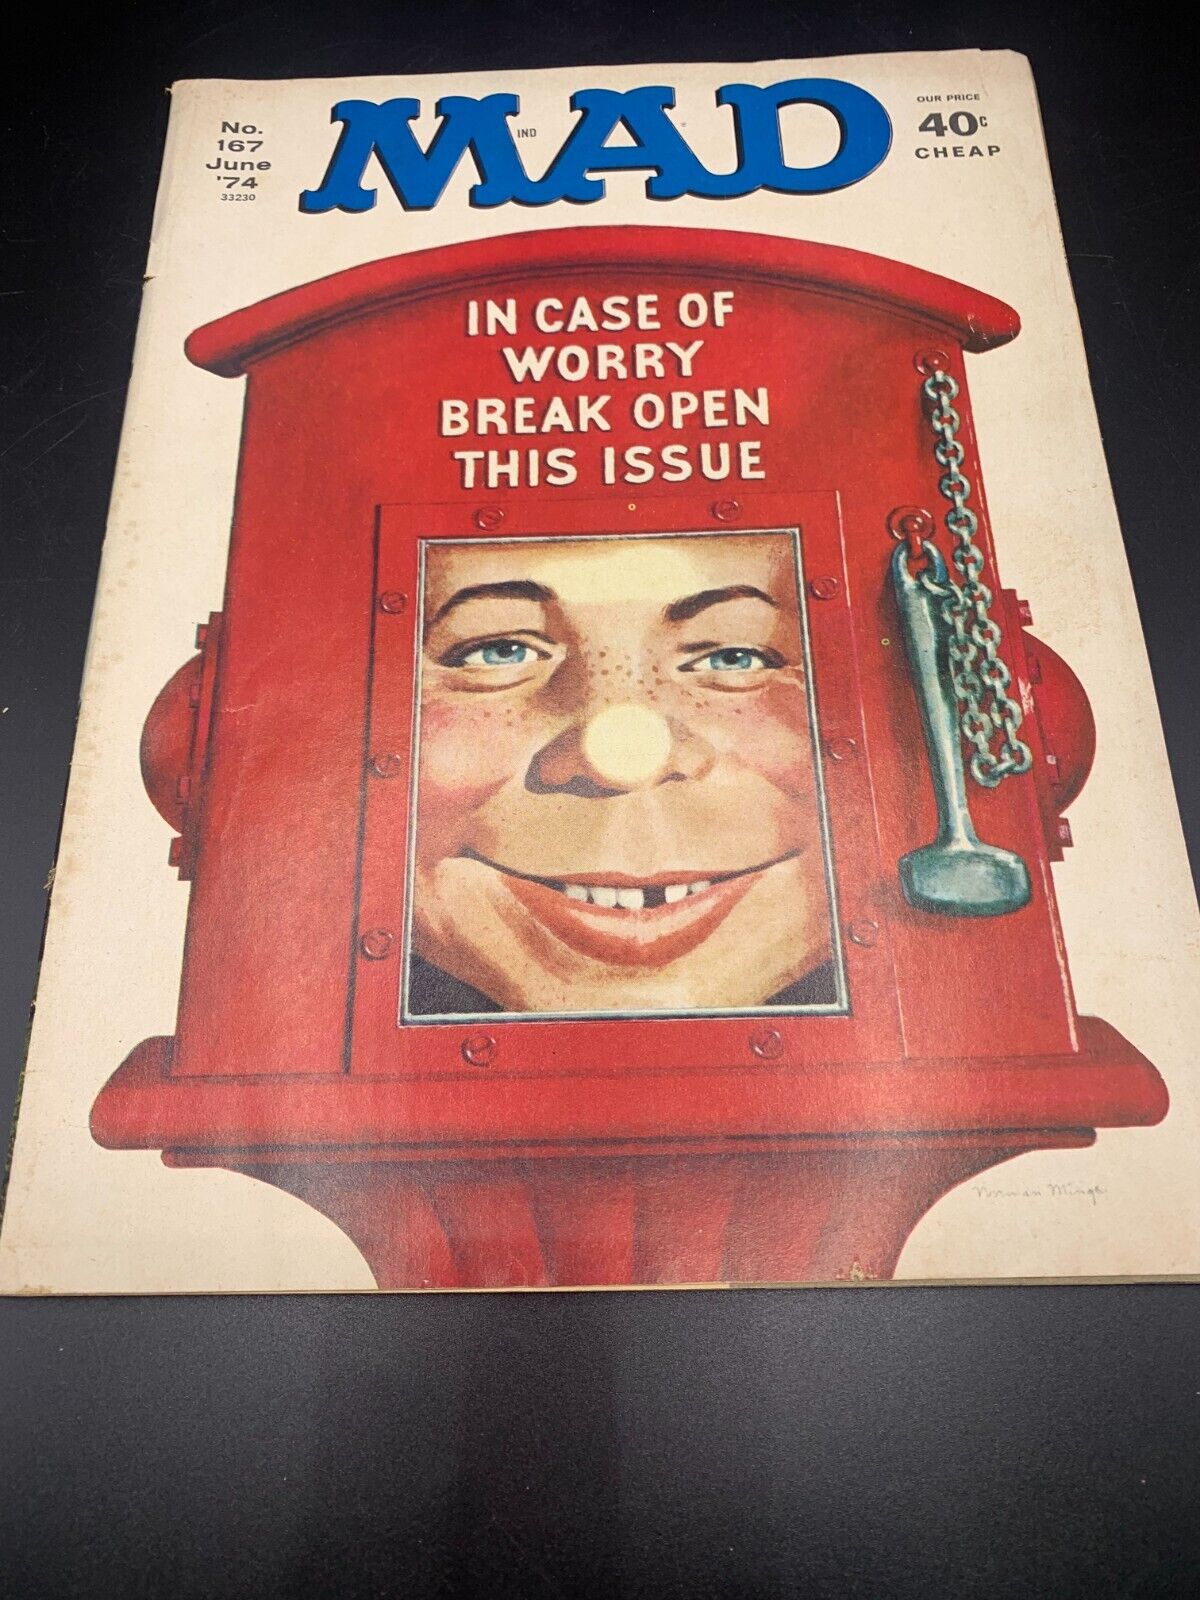 Vintage Mad Magazine#167 June 1974 In Case of Worry Break Open This Issue